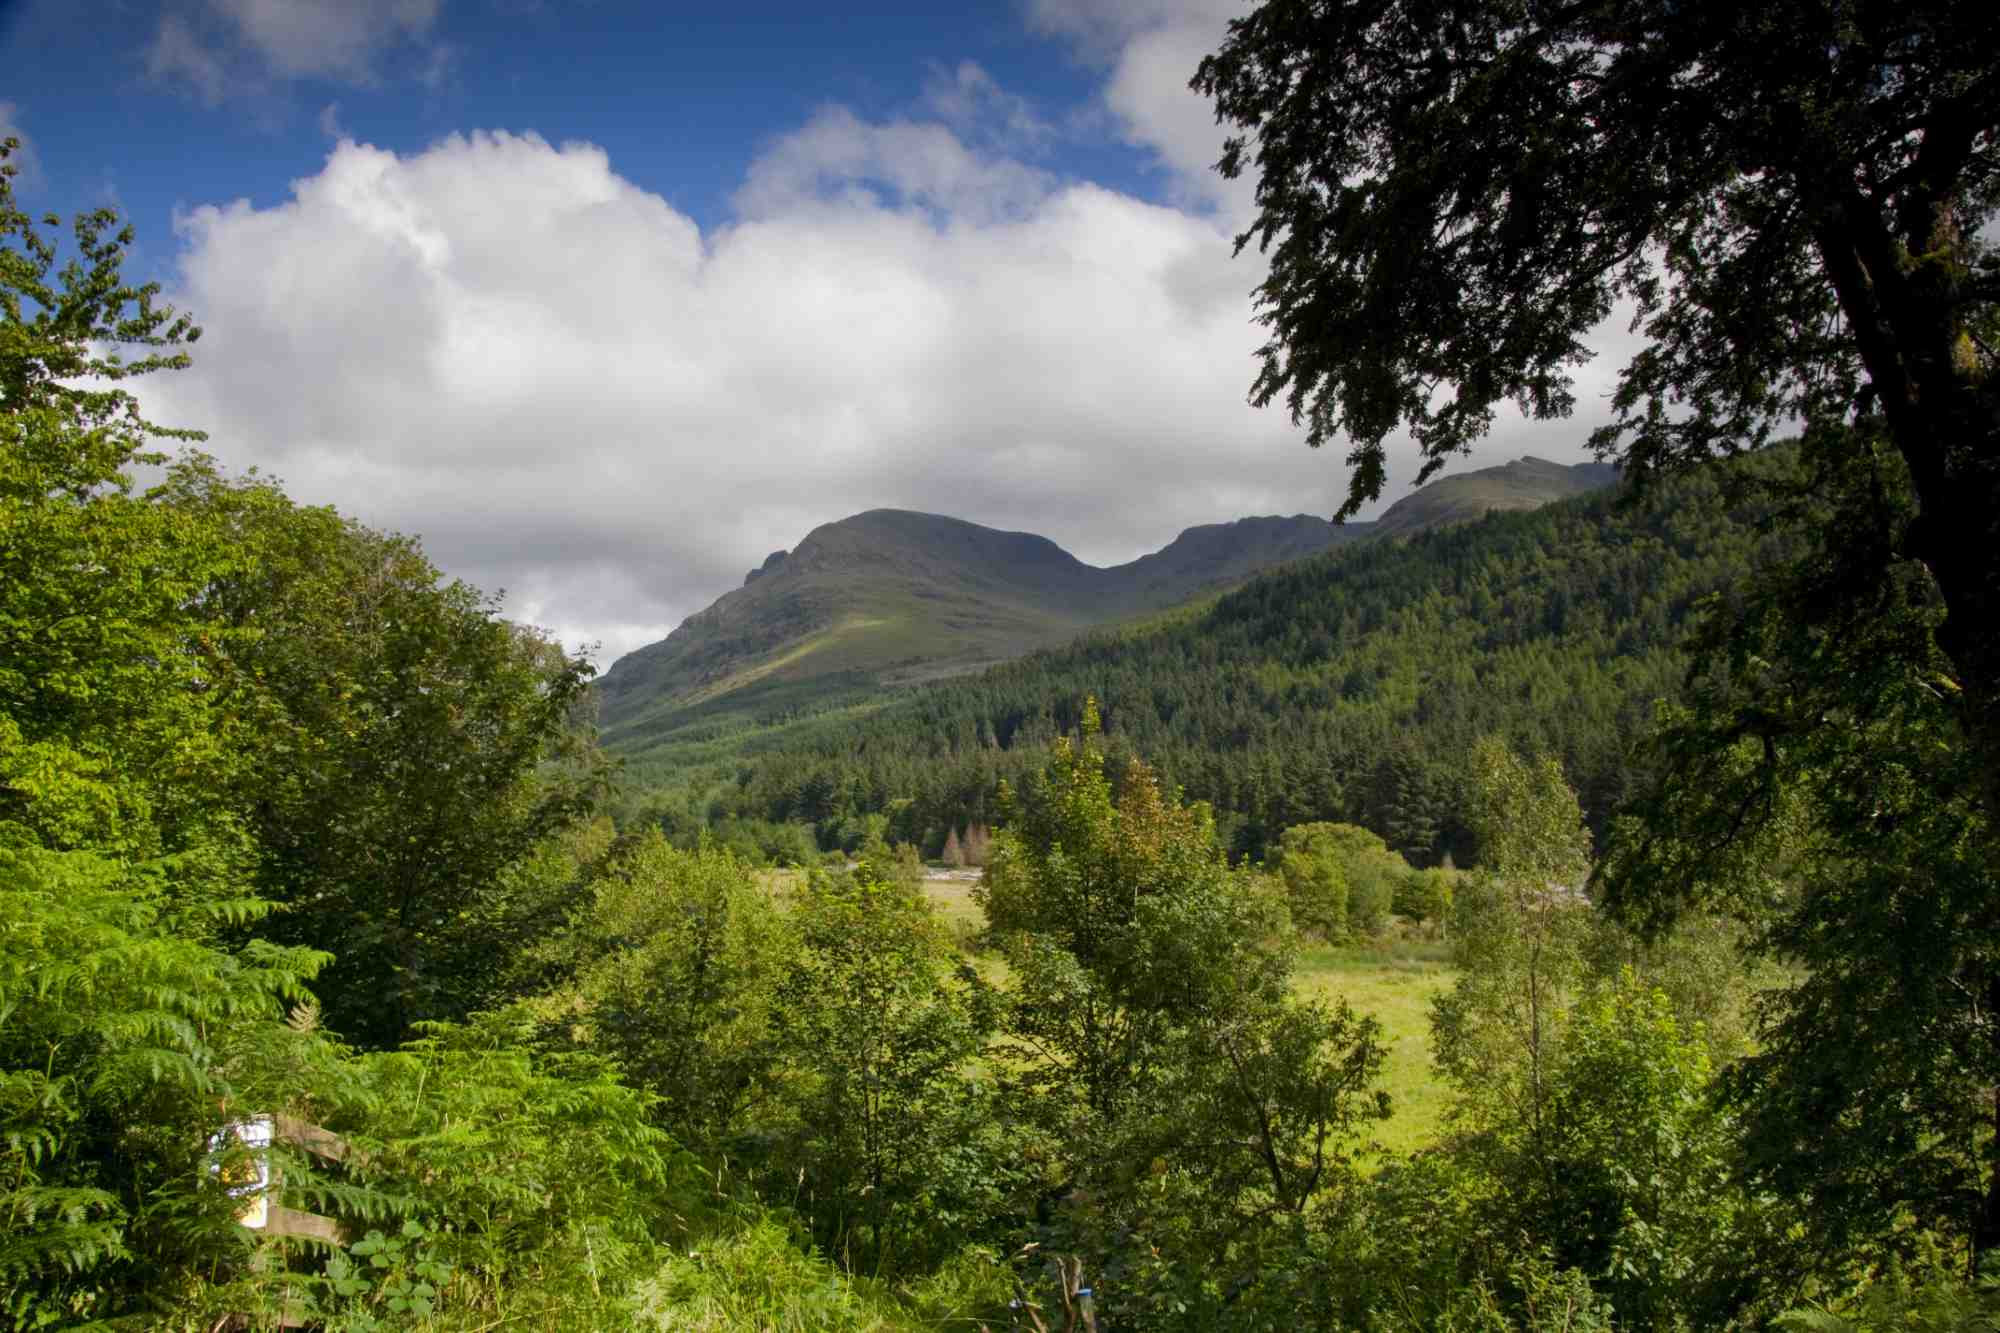 The view from YHA Ennerdale